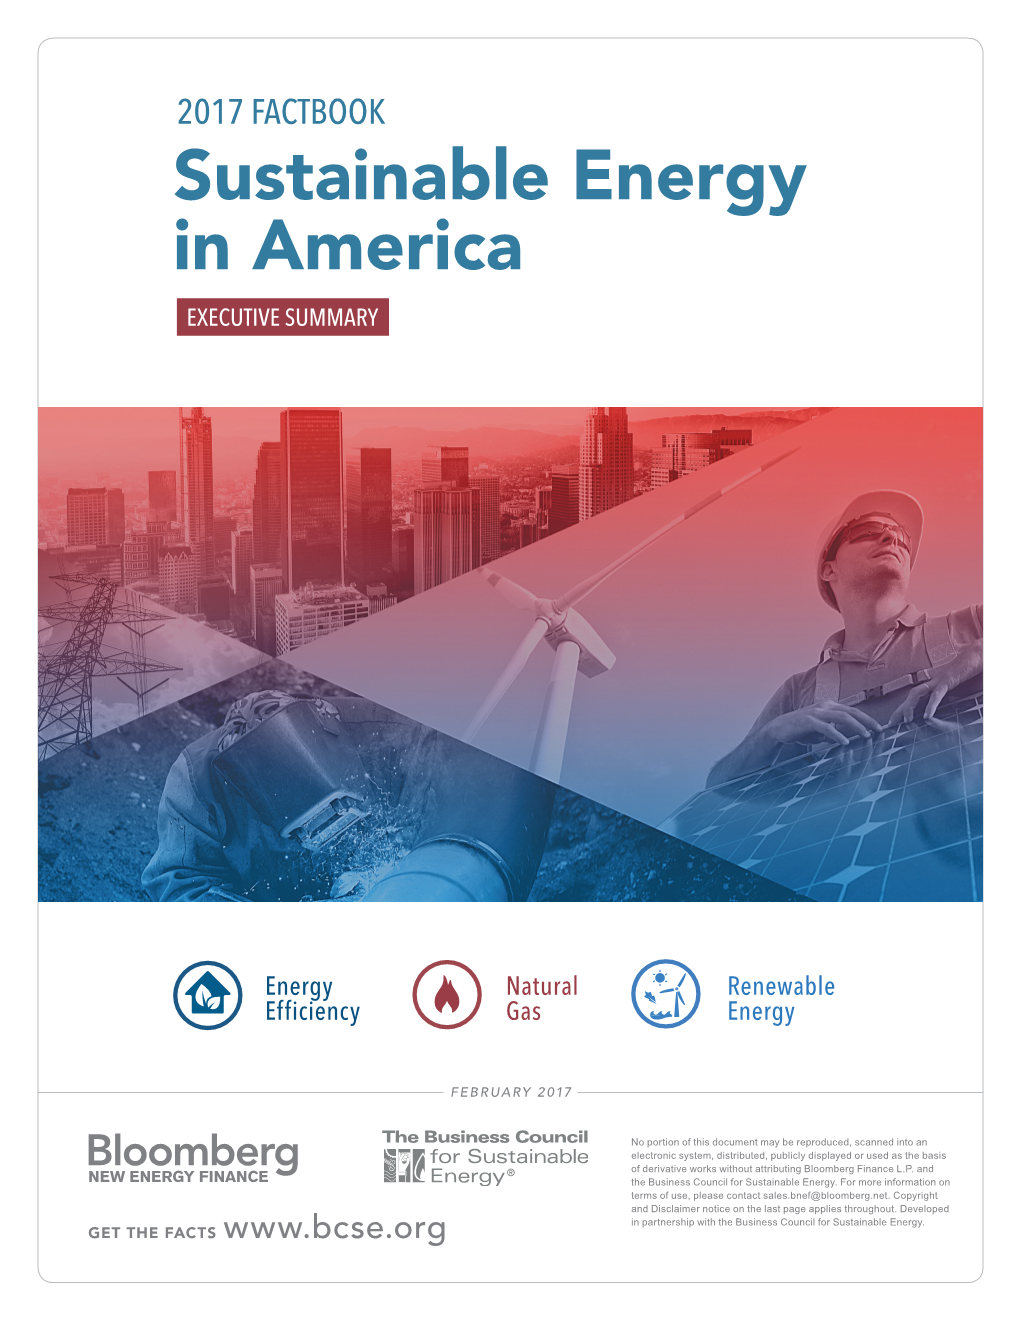 2017 Factbook: Sustainable Energy in America: Executive Summary